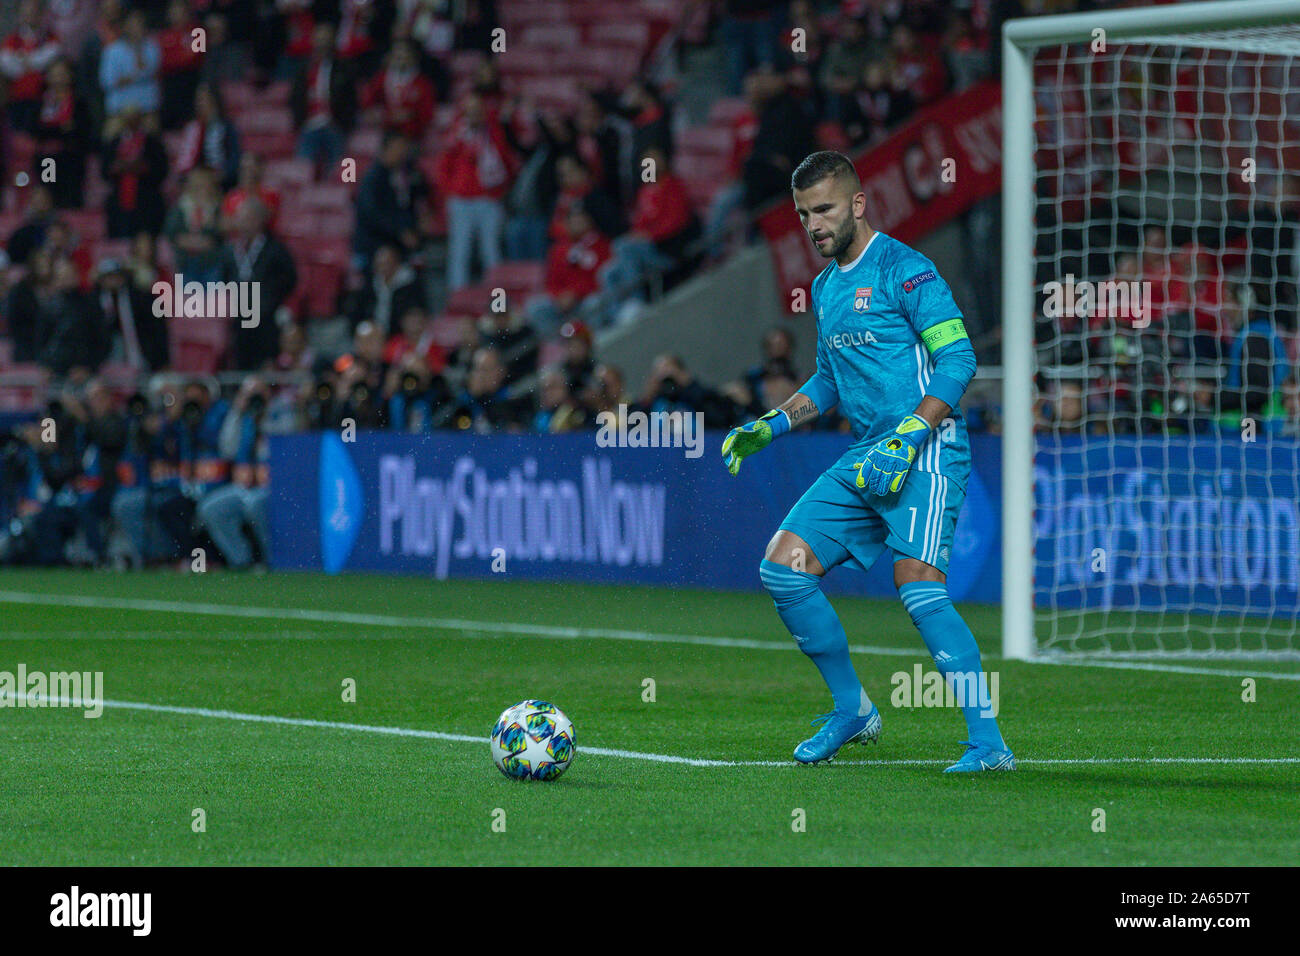 Lisbon, Portugal. 23rd Oct, 2019. Lyon's goalkeeper from Portugal Anthony Lopes (1) in action during the game of the 1st round of Group G for the UEFA Champions League, SL Benfica vs Olympique Lyonnais © Alexandre de Sousa/Alamy Live News Stock Photo